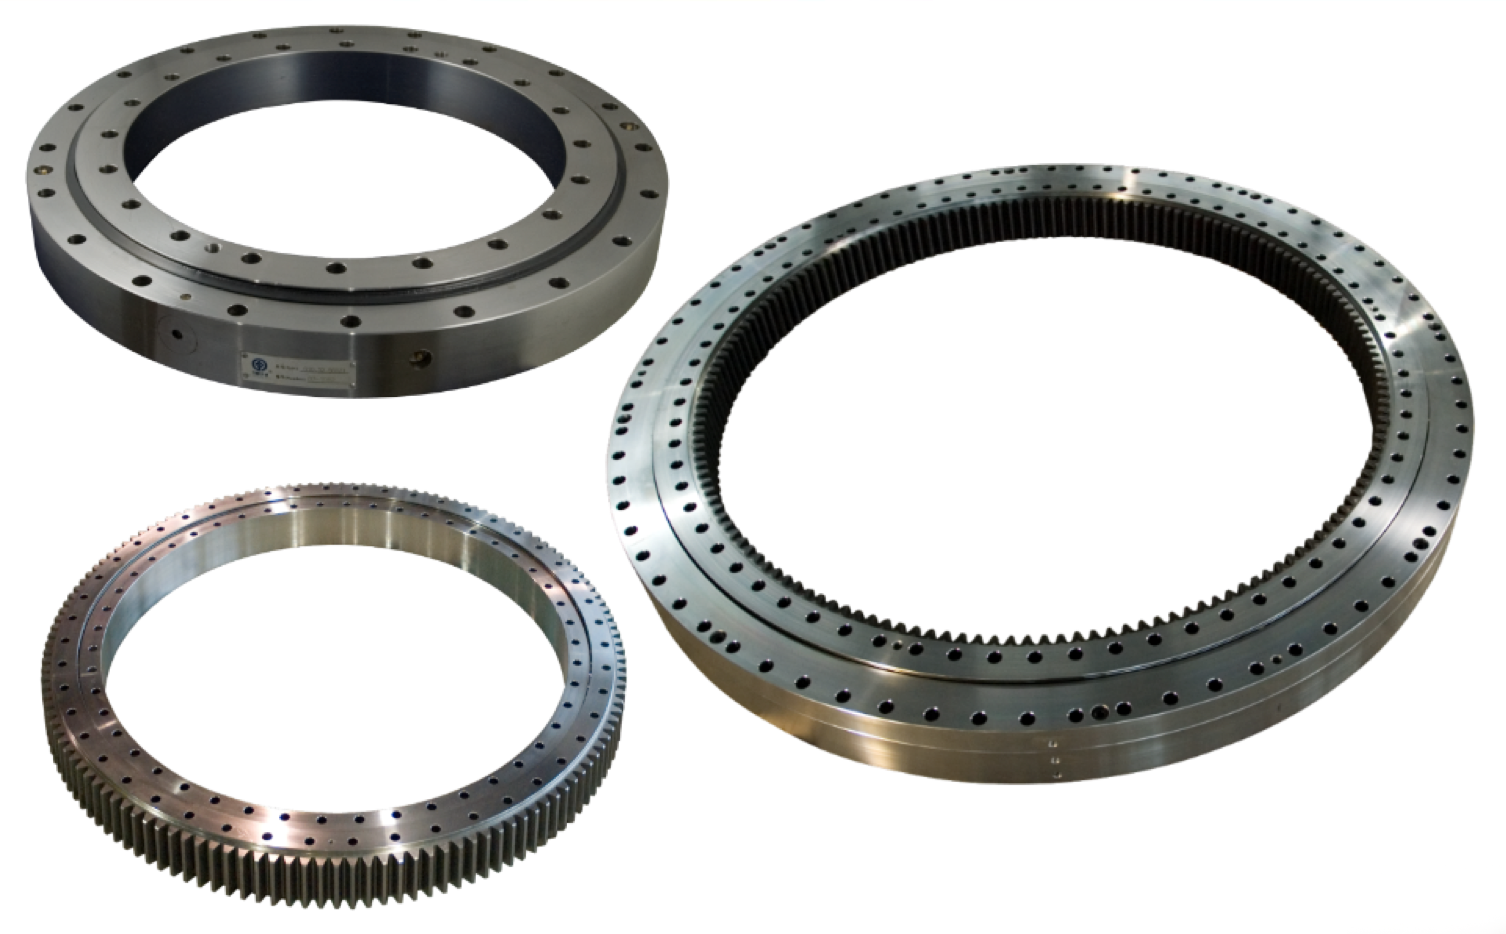 Unimacts supplies companies with high quality construction parts like rings.